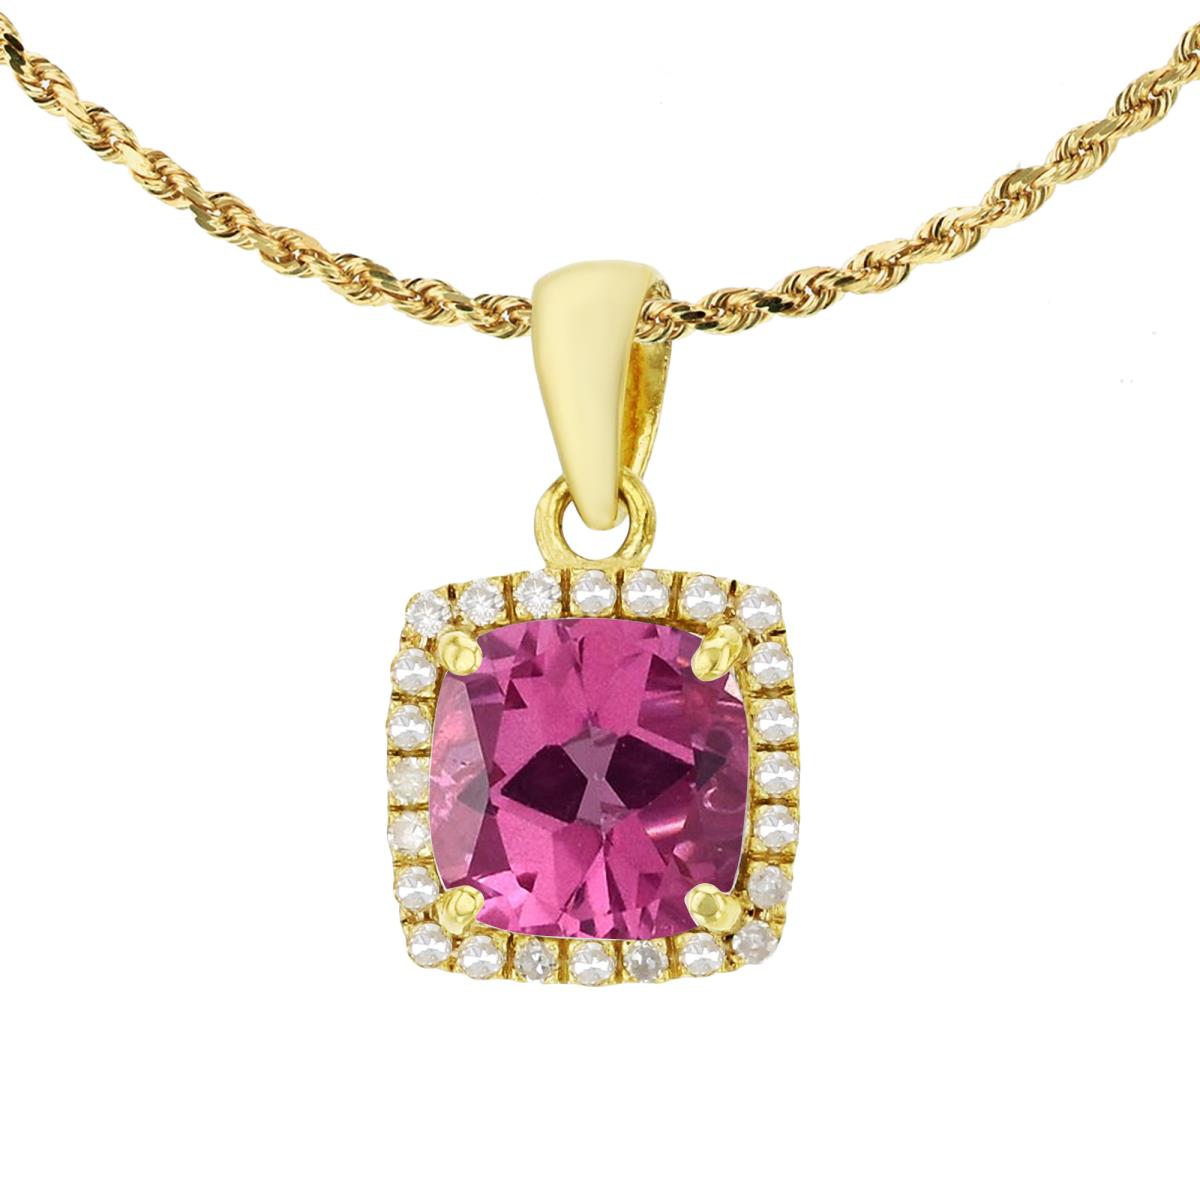 10K Yellow Gold 7mm Cushion Pure Pink & 0.12 CTTW Diamond Halo 18" Rope Chain Necklace